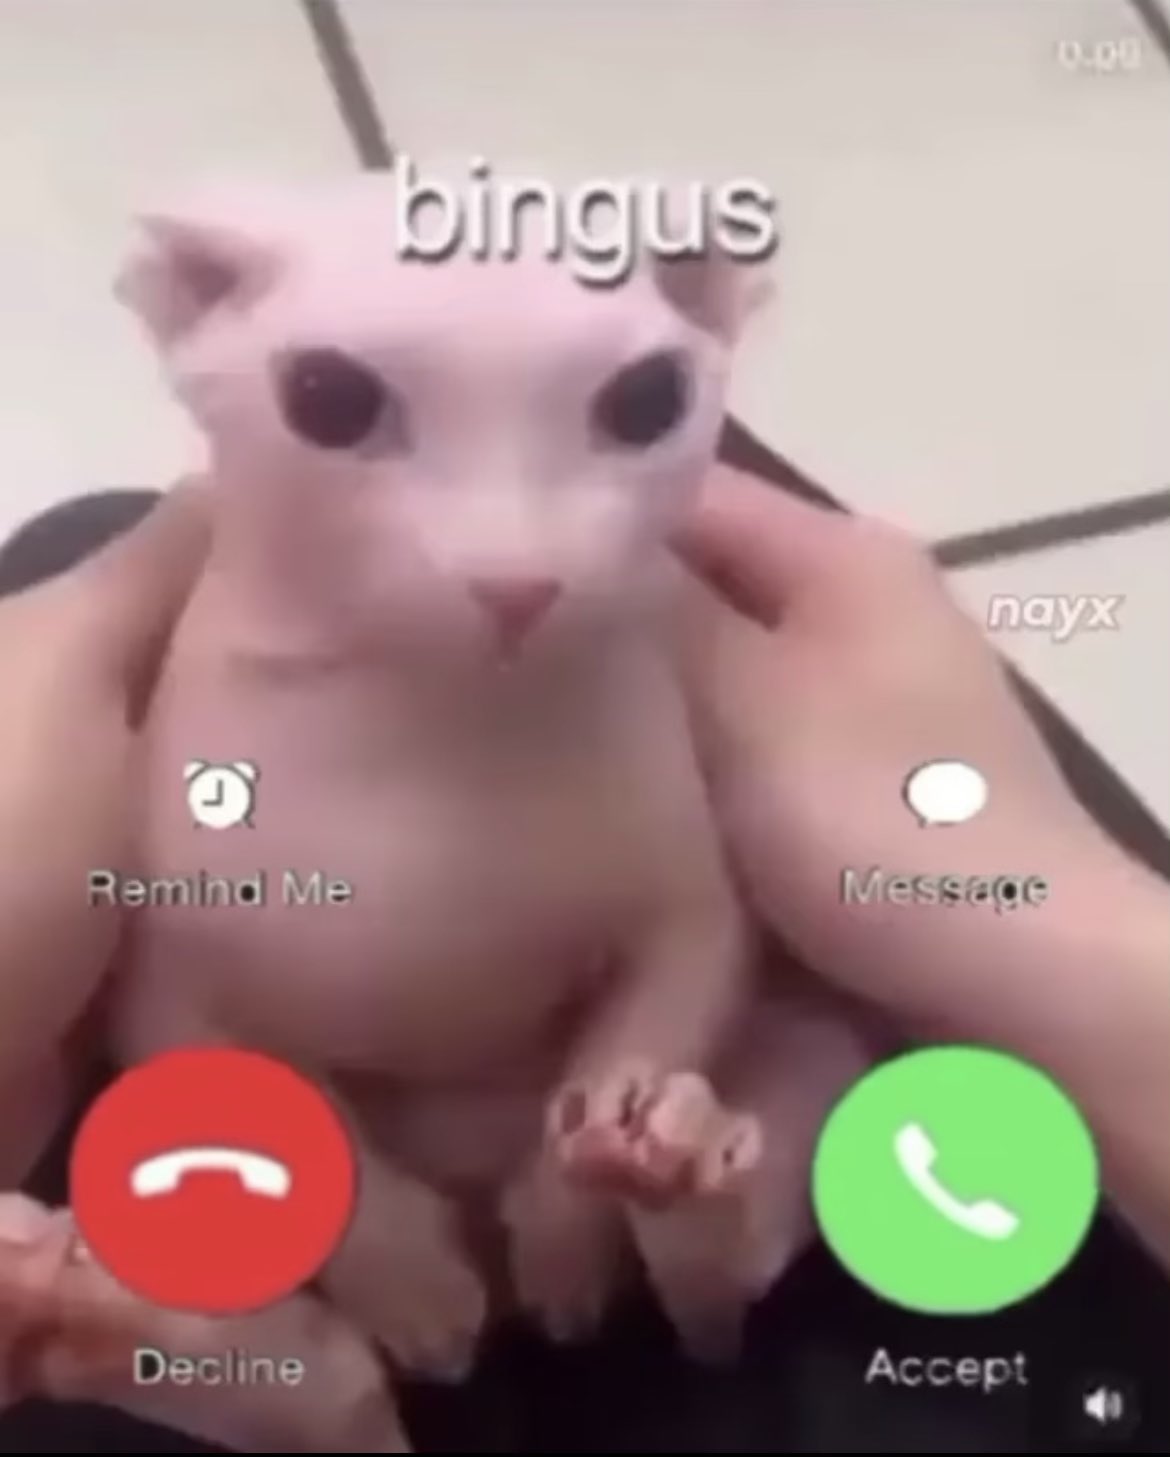 incoming call from bingus